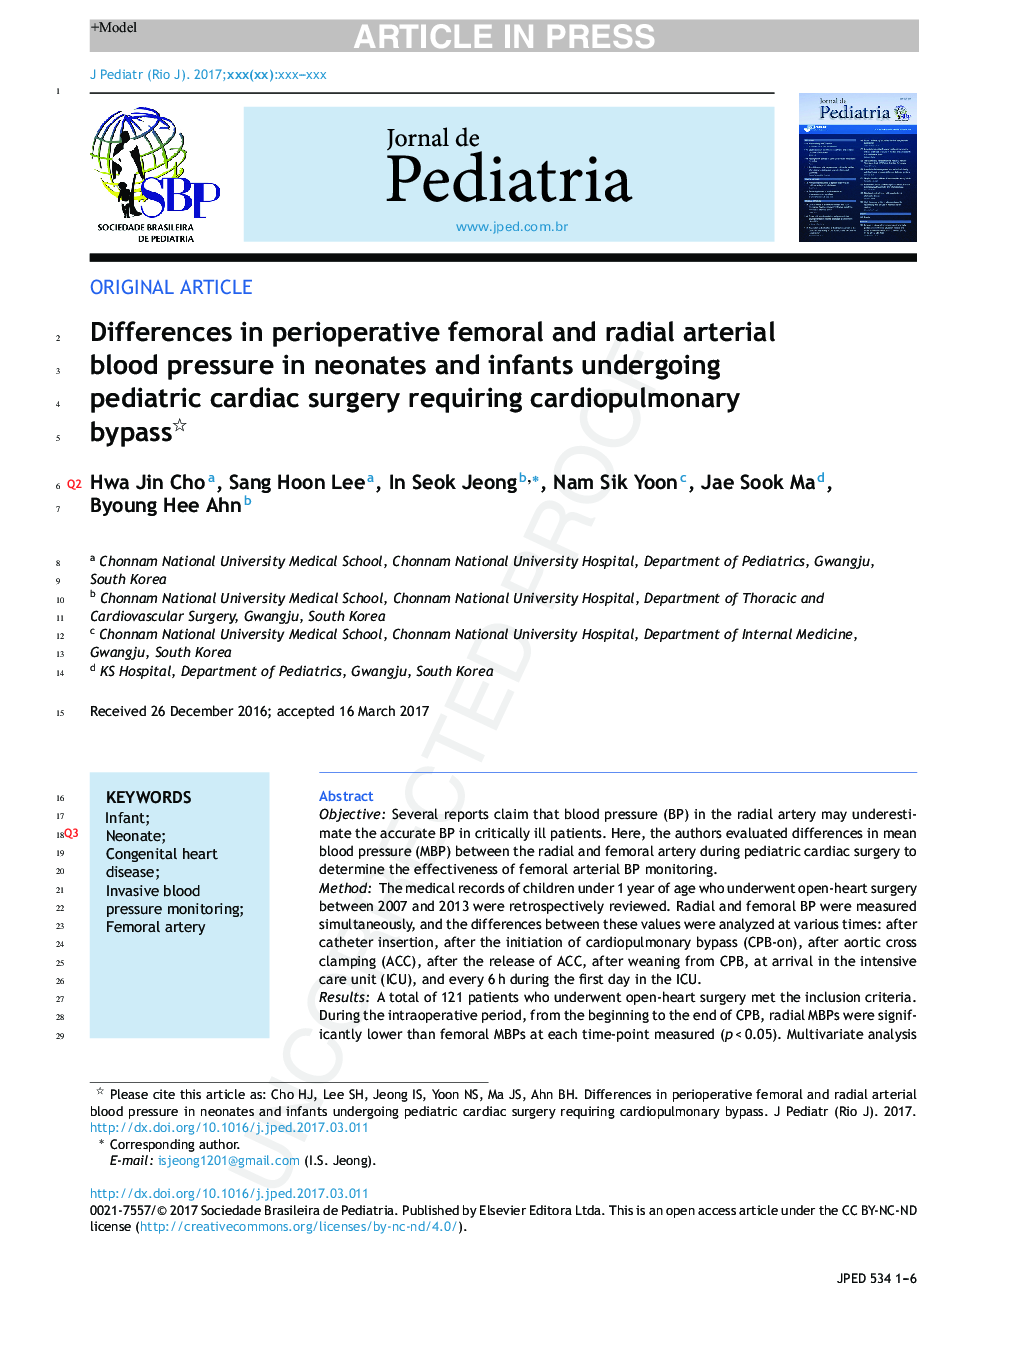 Differences in perioperative femoral and radial arterial blood pressure in neonates and infants undergoing cardiac surgery requiring cardiopulmonary bypass